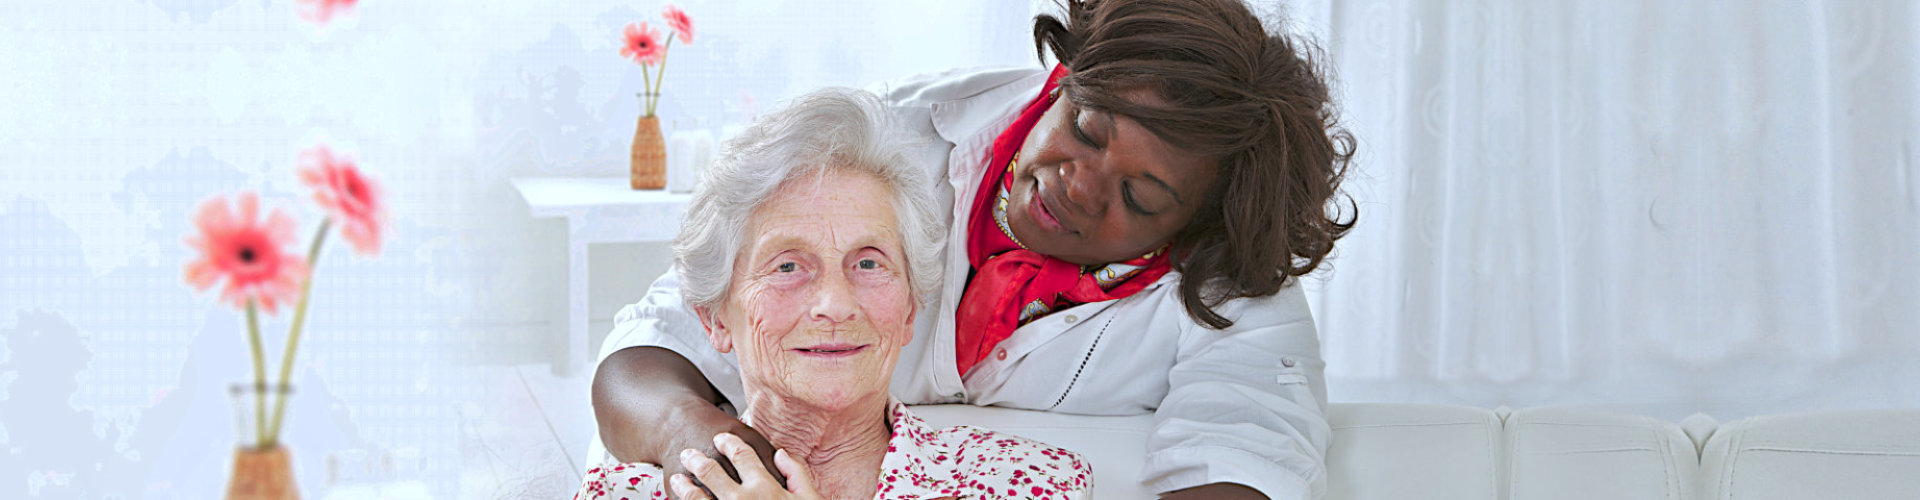 caregiver and eldery woman smiling